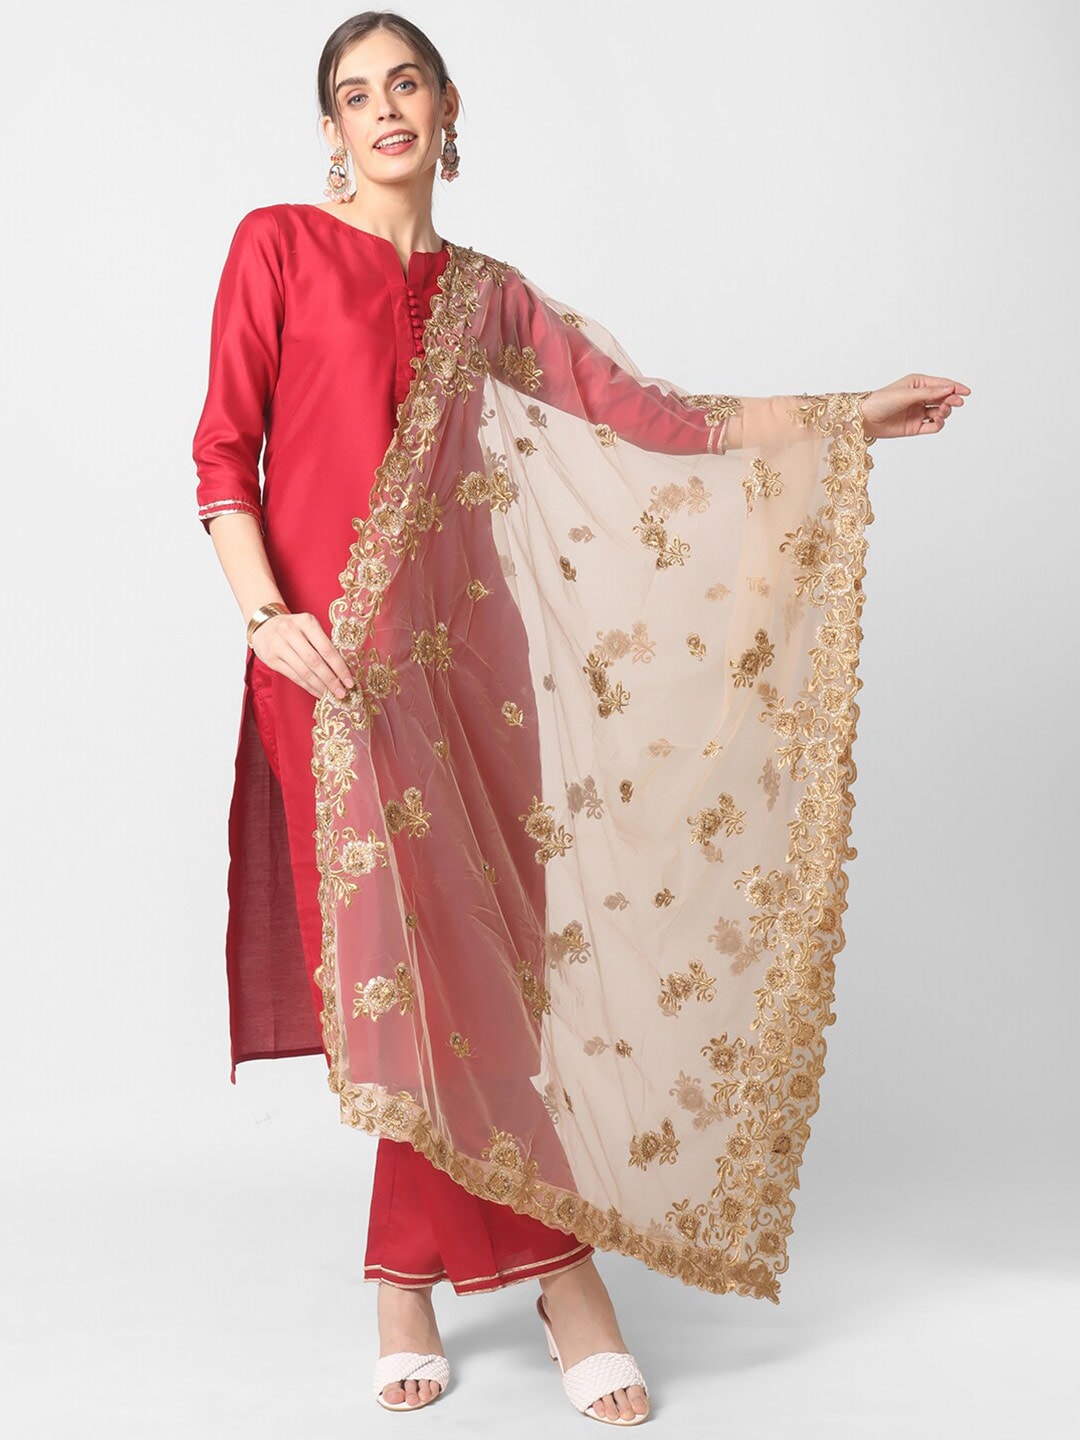 Dupatta Bazaar Gold Embroidered Dupatta with Beads and Stones & Cutwork Details Price in India